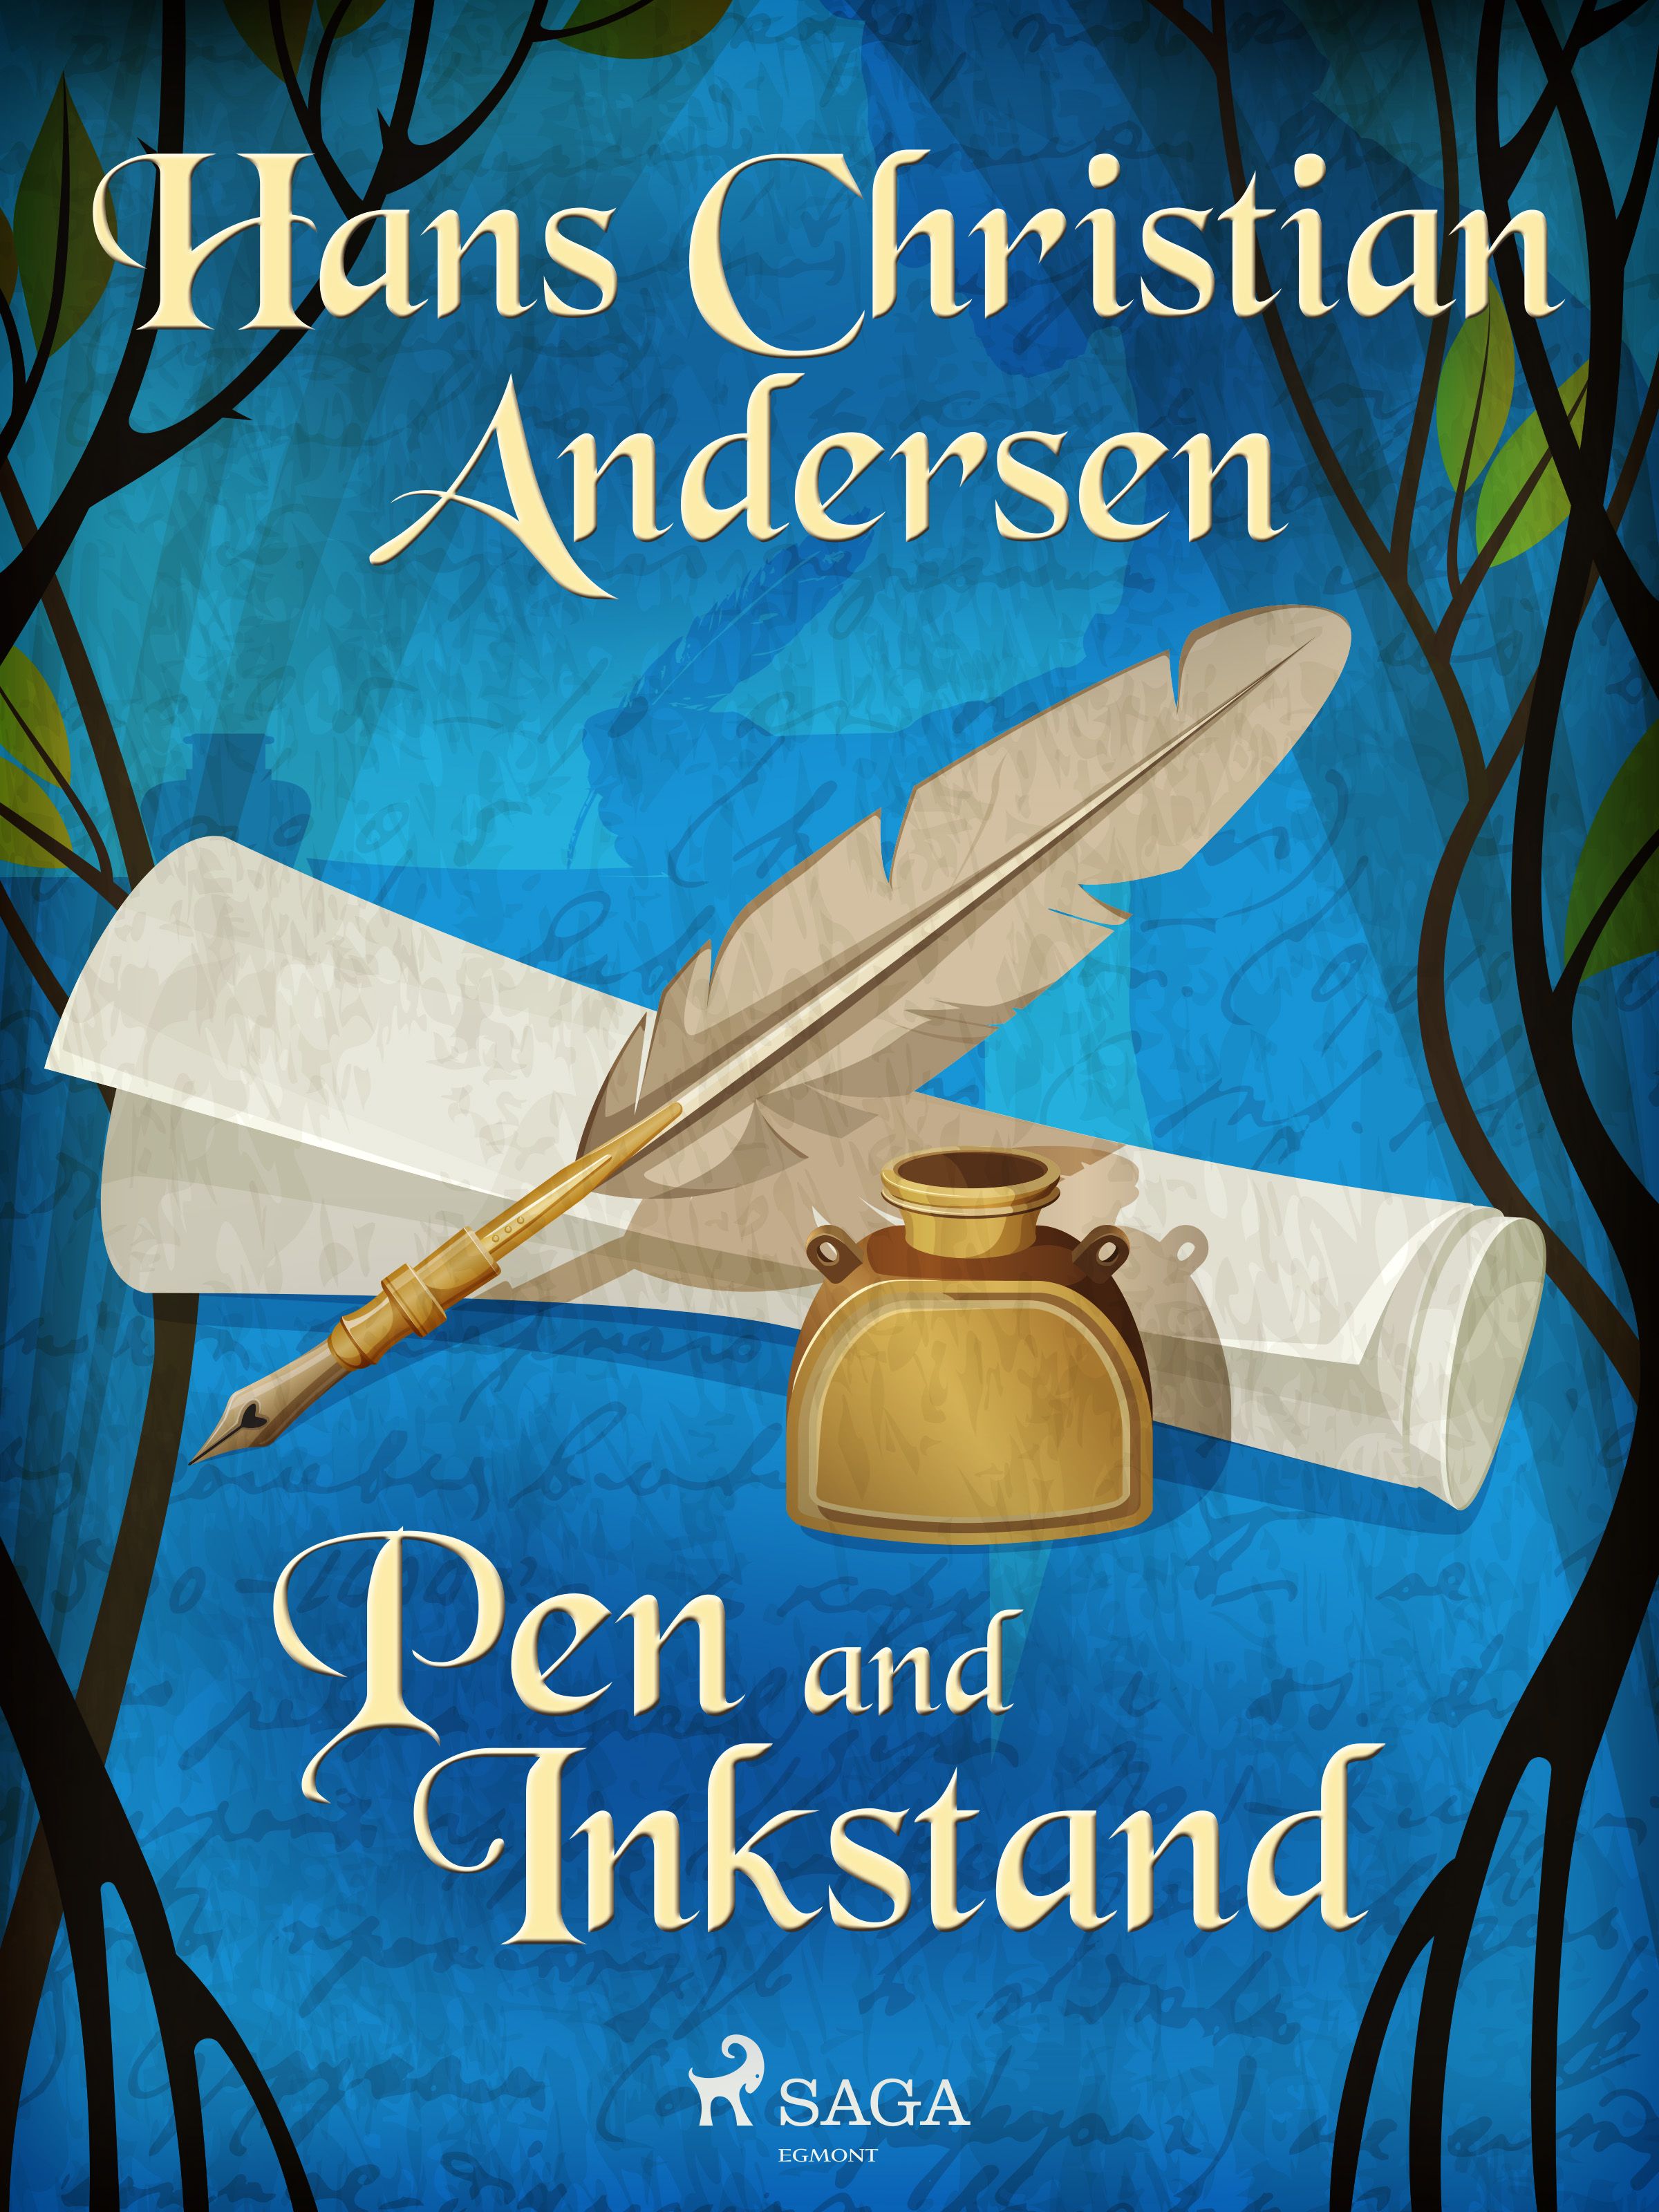 Pen and Inkstand, eBook by Hans Christian Andersen